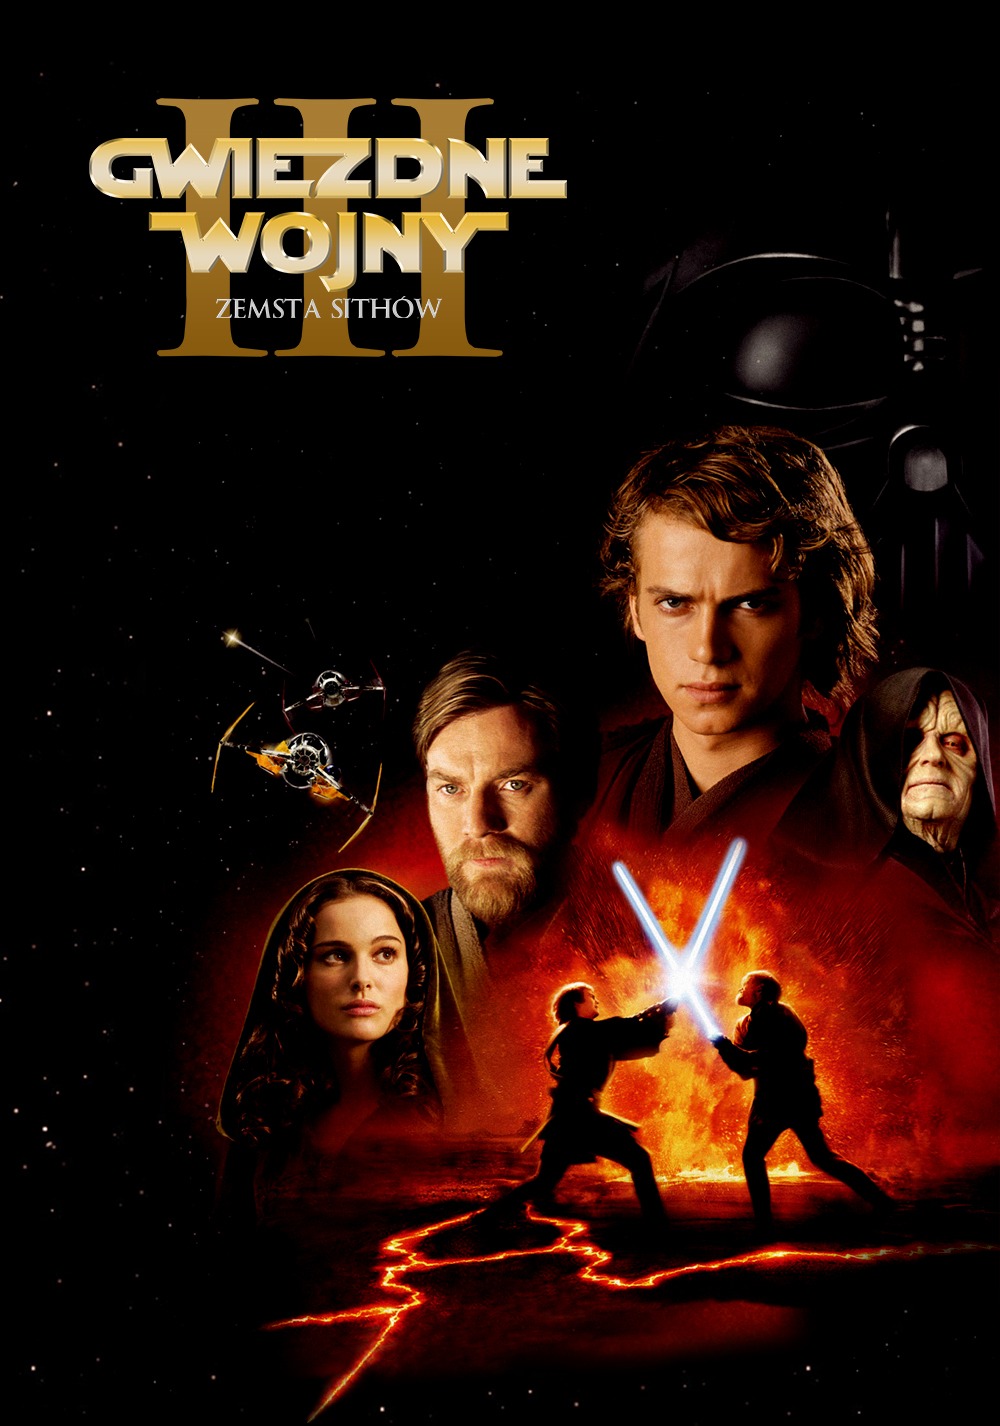 Star Wars Ep. III: Revenge of the Sith for android download